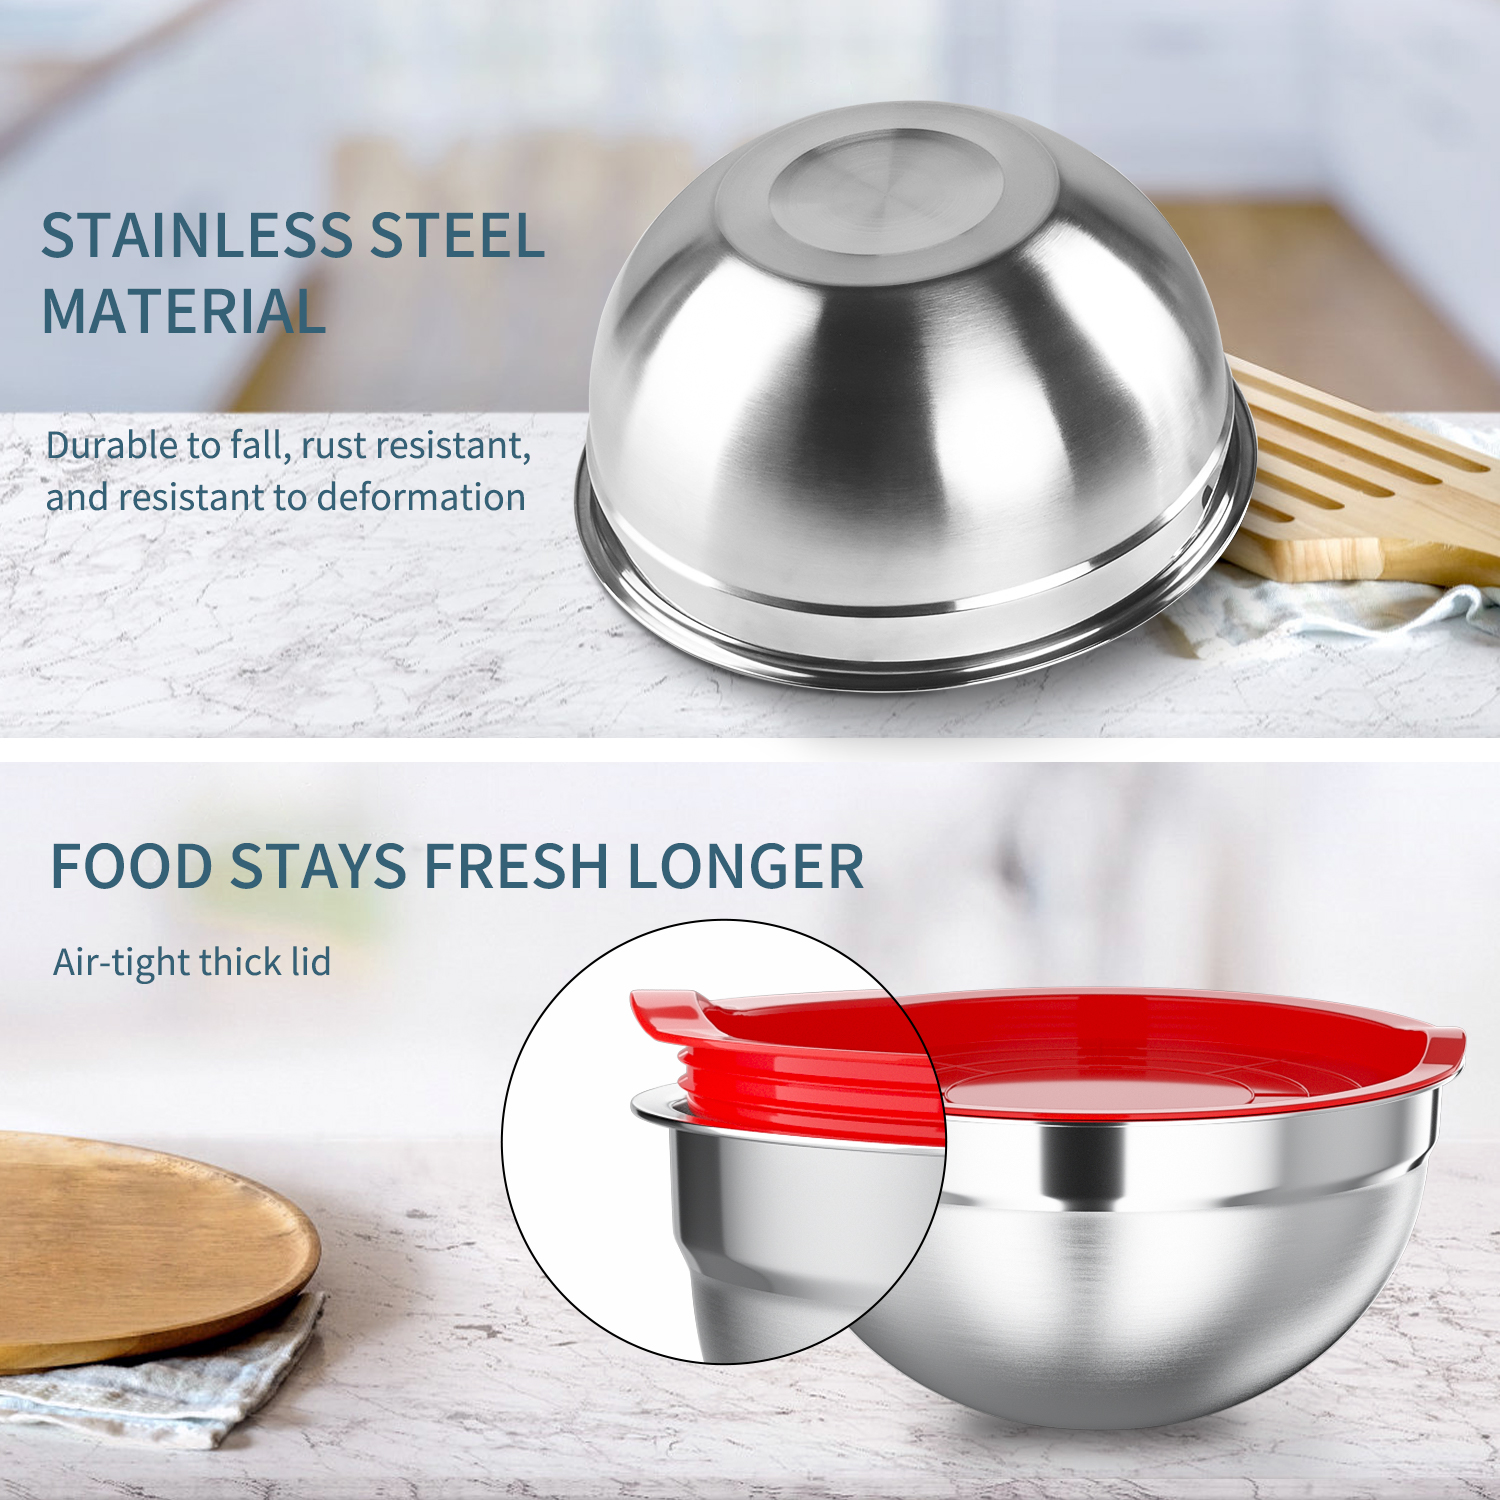 TINANA Mixing Bowls with Lids: Stainless Steel Mixing Bowls Set - 7PCS Metal Nesting Mixing Bowls for Kitchen, Size 7, 4.5, 3, 2, 1.5, 1, 0.7 QT, Great for Prep, Baking, Serving-Multi-Color - image 3 of 7